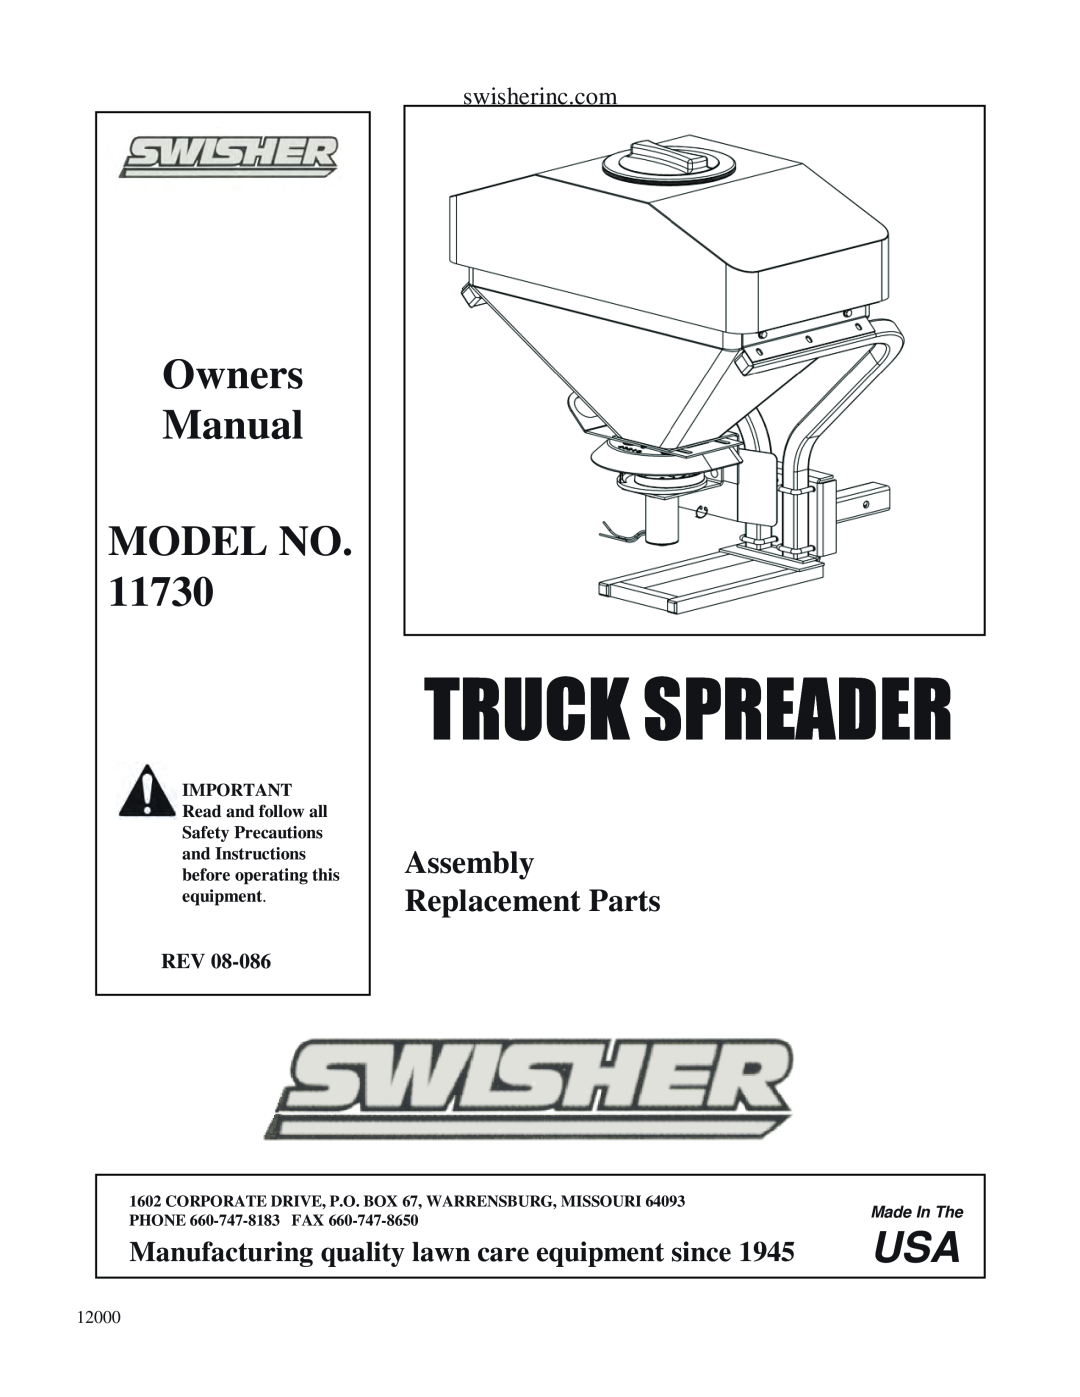 Swisher 11730 owner manual Truckspreader, Assembly Replacement Parts, Manufacturing quality lawn care equipment since 